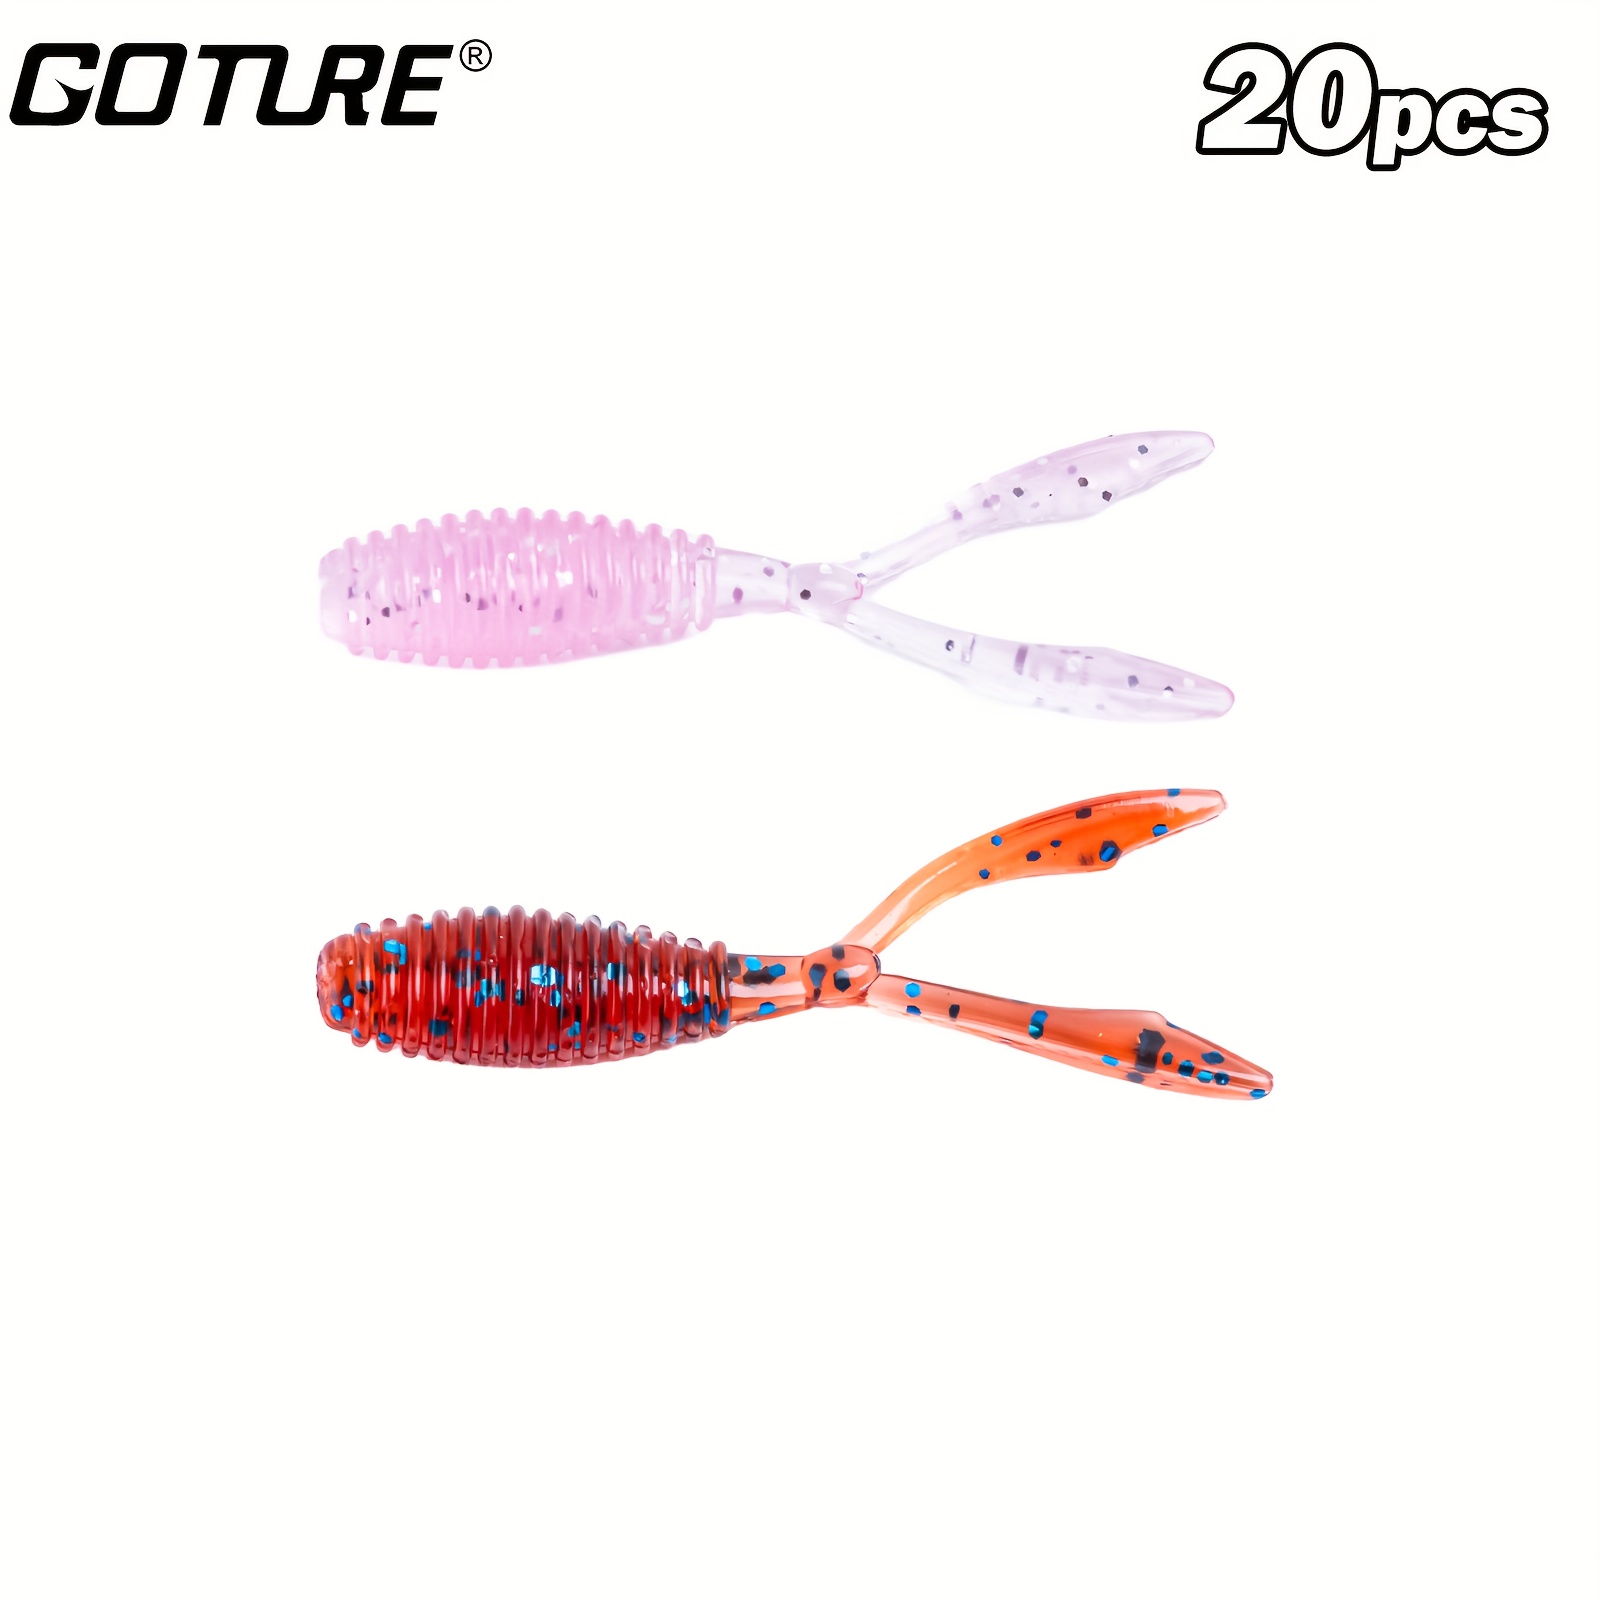  Bass Fishing Lure Topwater Bass Lures Swimbait Hard Bait Trout  Perch Bass Lifelike Lures for Freshwater Saltwater Fishing Tackle Kits  (D-3.74，0.52oz) : Sports & Outdoors